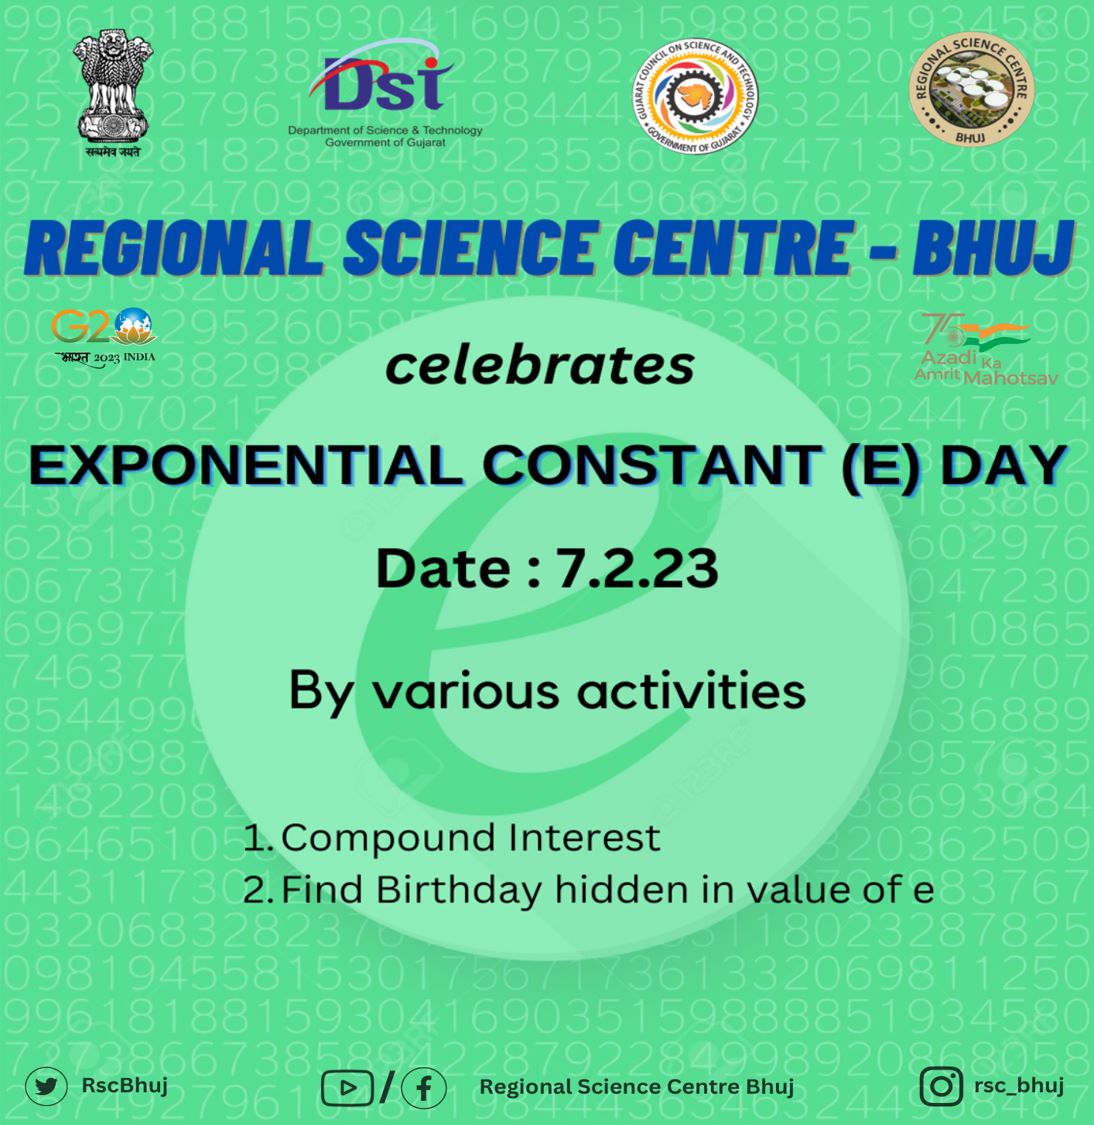 Today is 7-2-2023,for that we have 722023 is a Prime number 
Also #eday from Euler's number (e=2.718)  Which is 2nd most famous constant after π 
#FieldsMedal gallery @RscBhuj celebrated this day by various activities 
#RscBhuj
#Maths #today